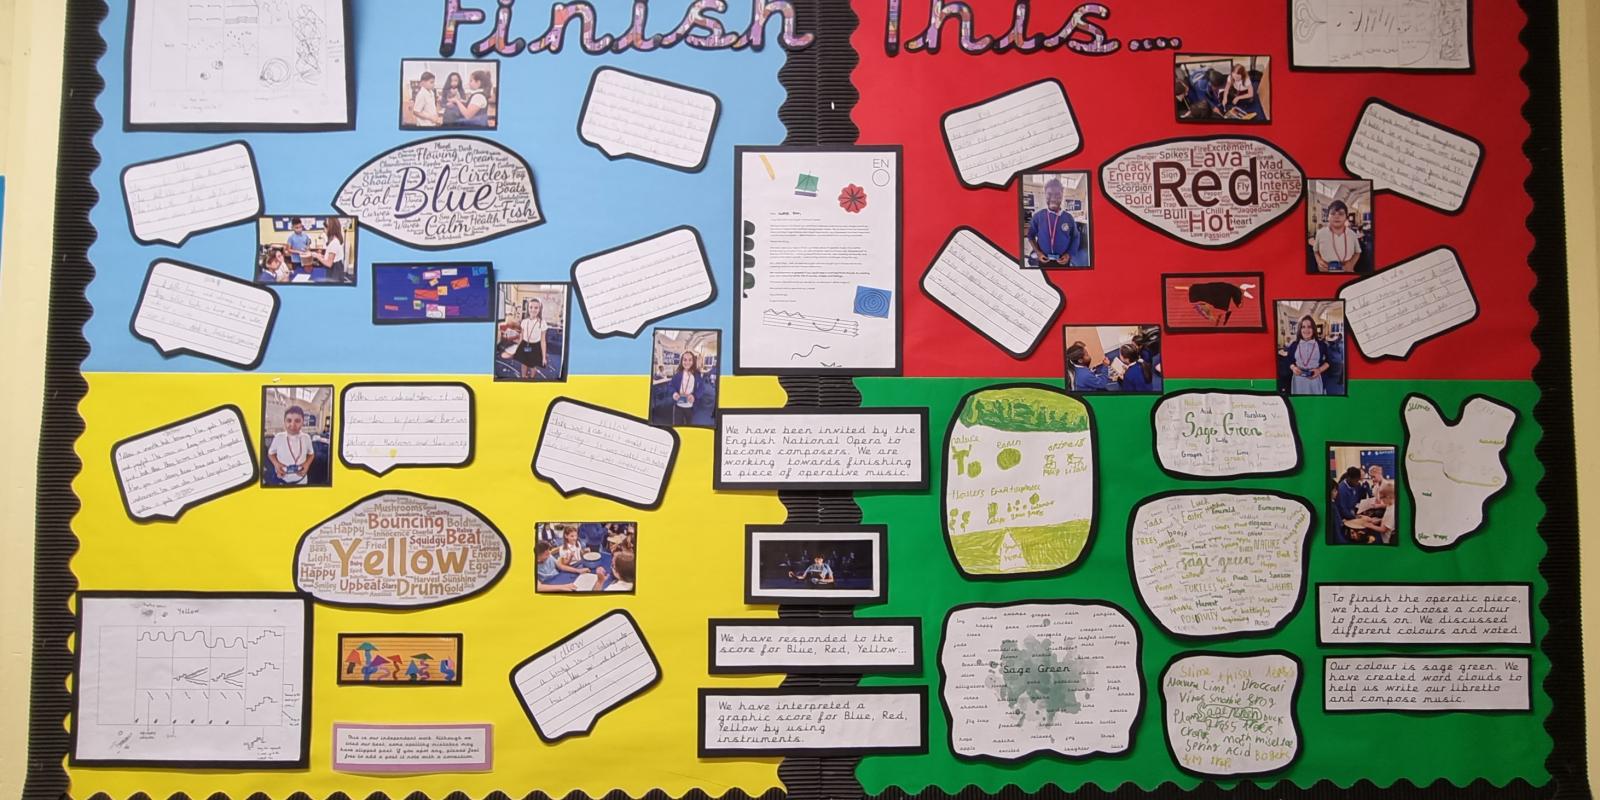 School Display from Haimo Primary School, London